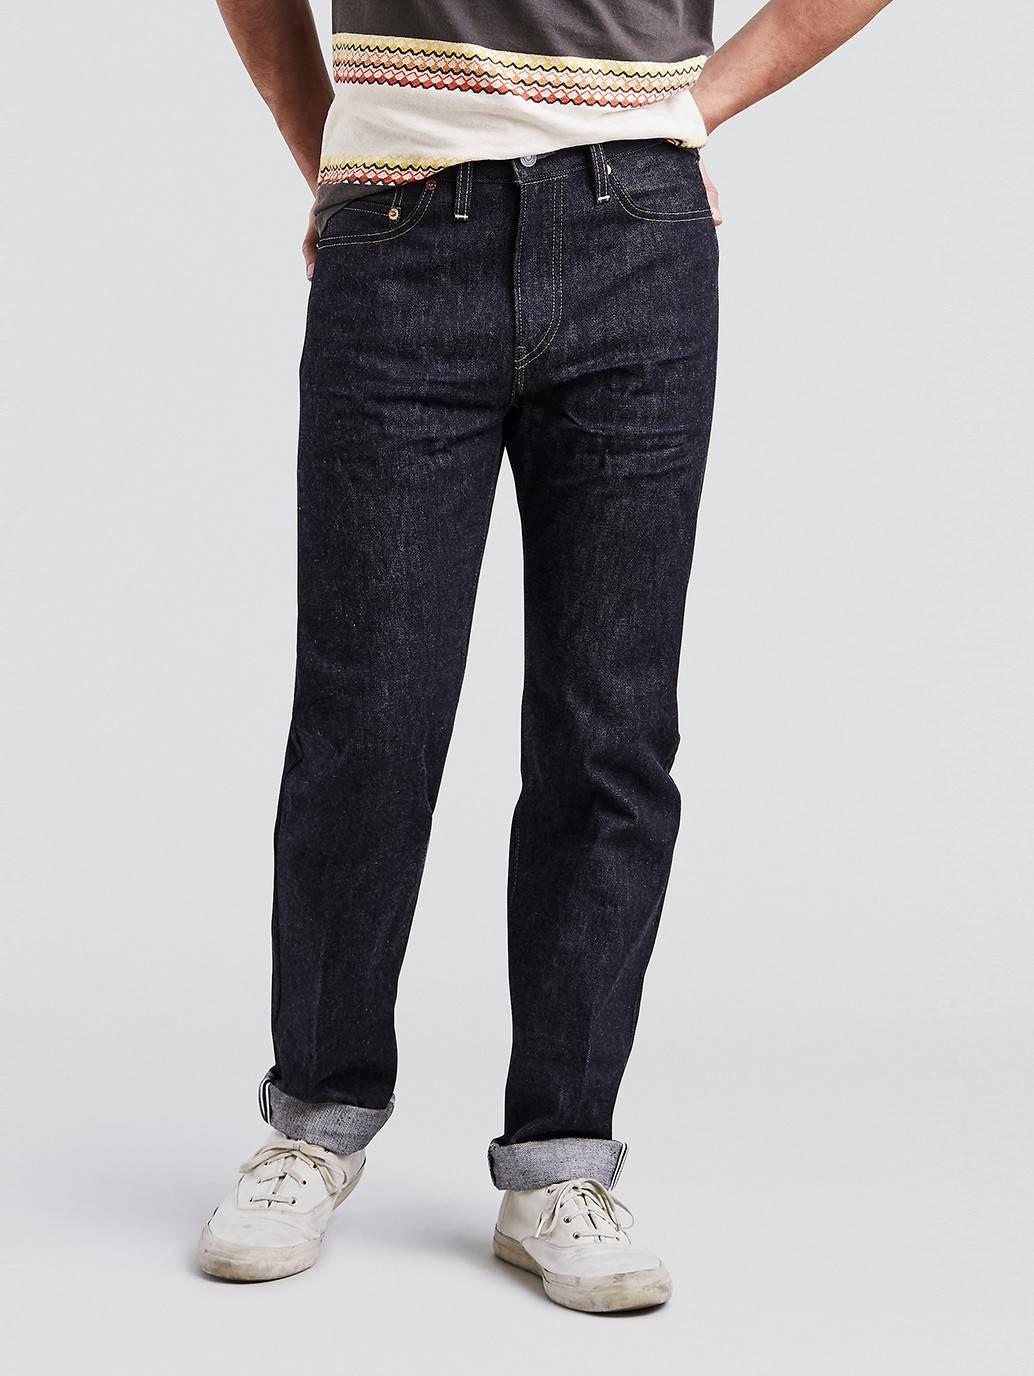 levis malaysia Levis 1954 501 Jeans 501540090 10 Model Front